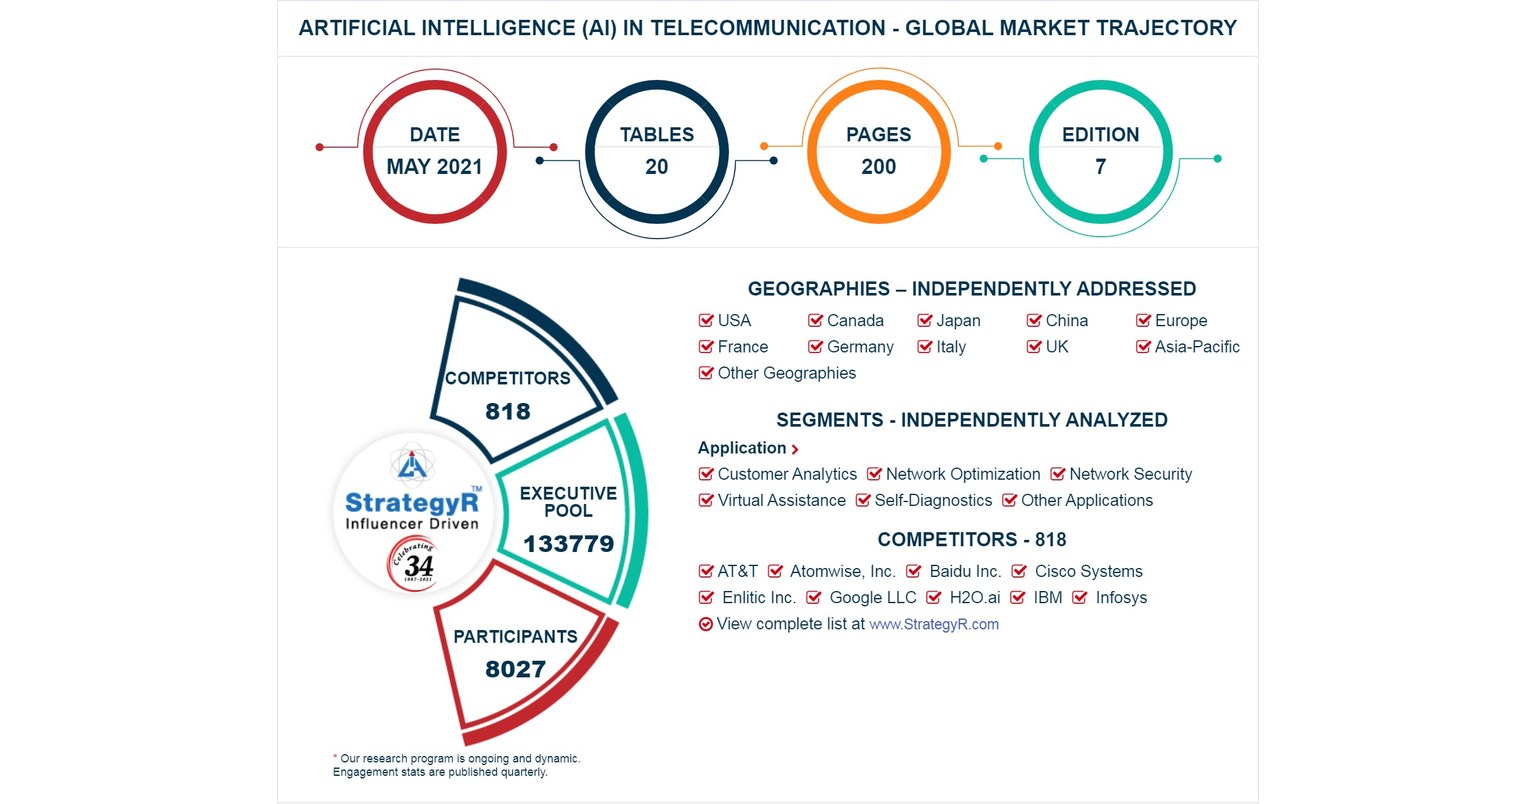 Global Artificial Intelligence (AI) in Telecommunication Market to Reach .5 Billion by 2026